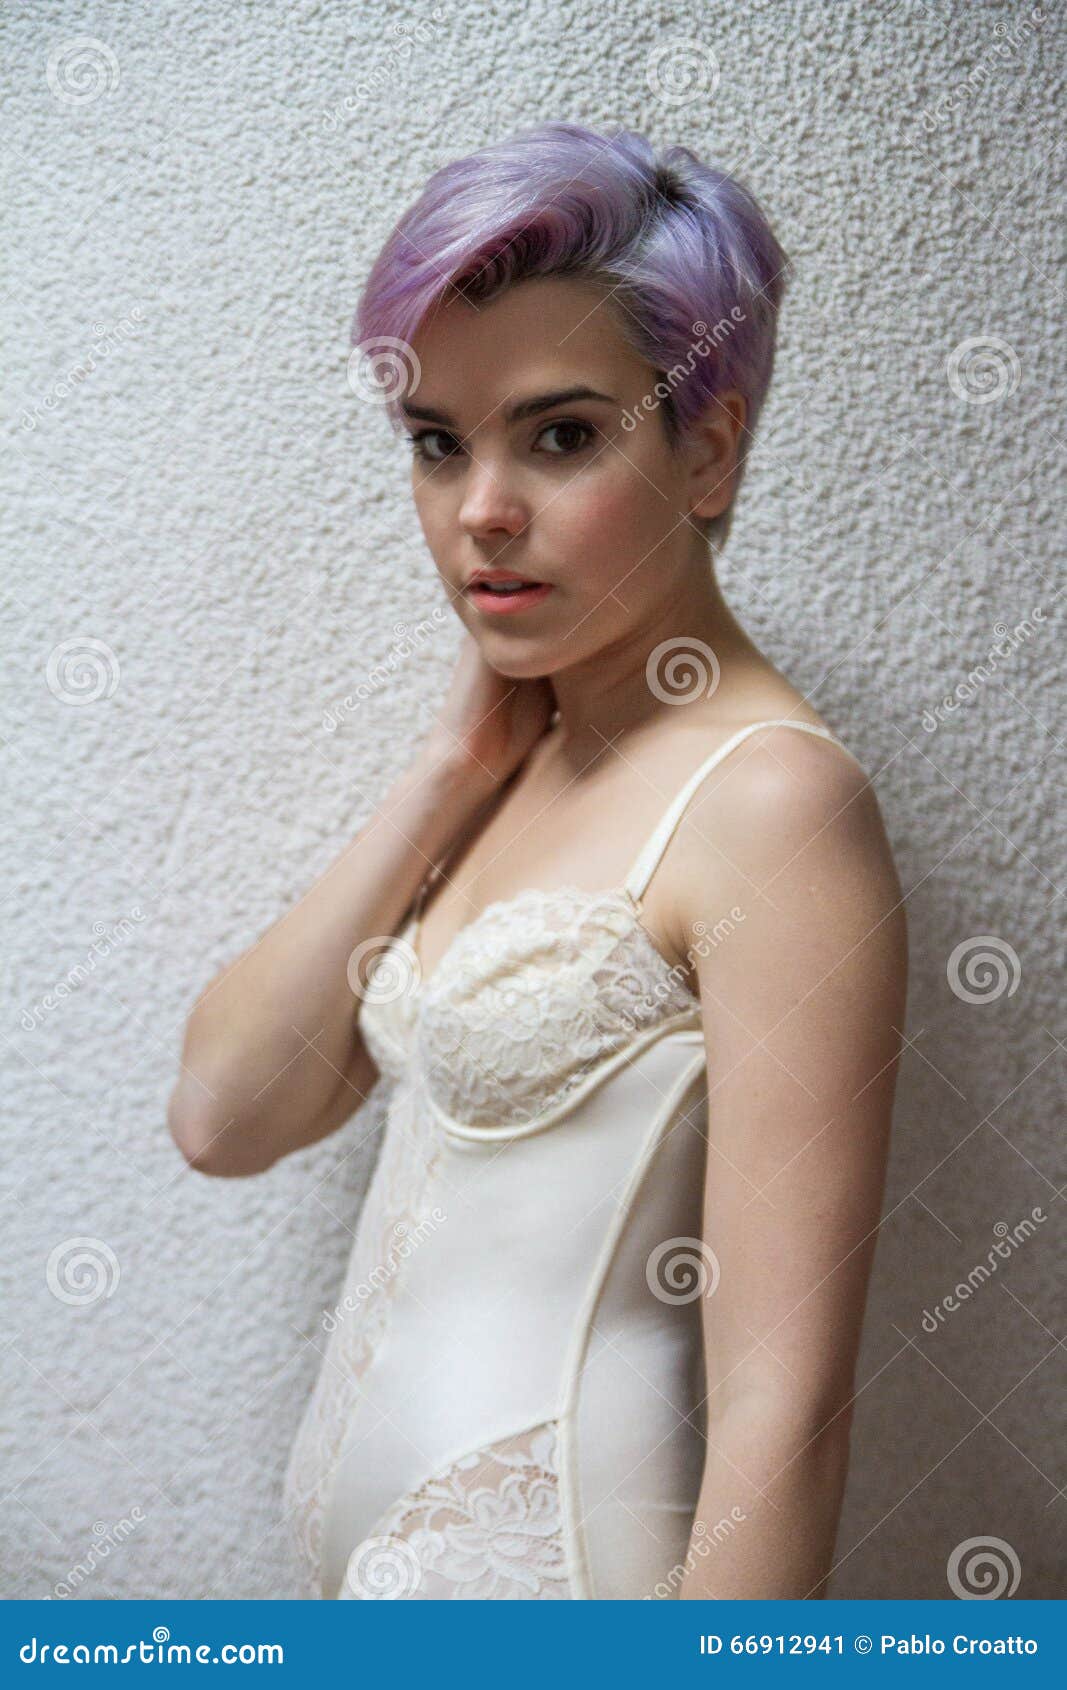 Beautiful Violet Short Haired Girl Looking At Camera Indoors Stock